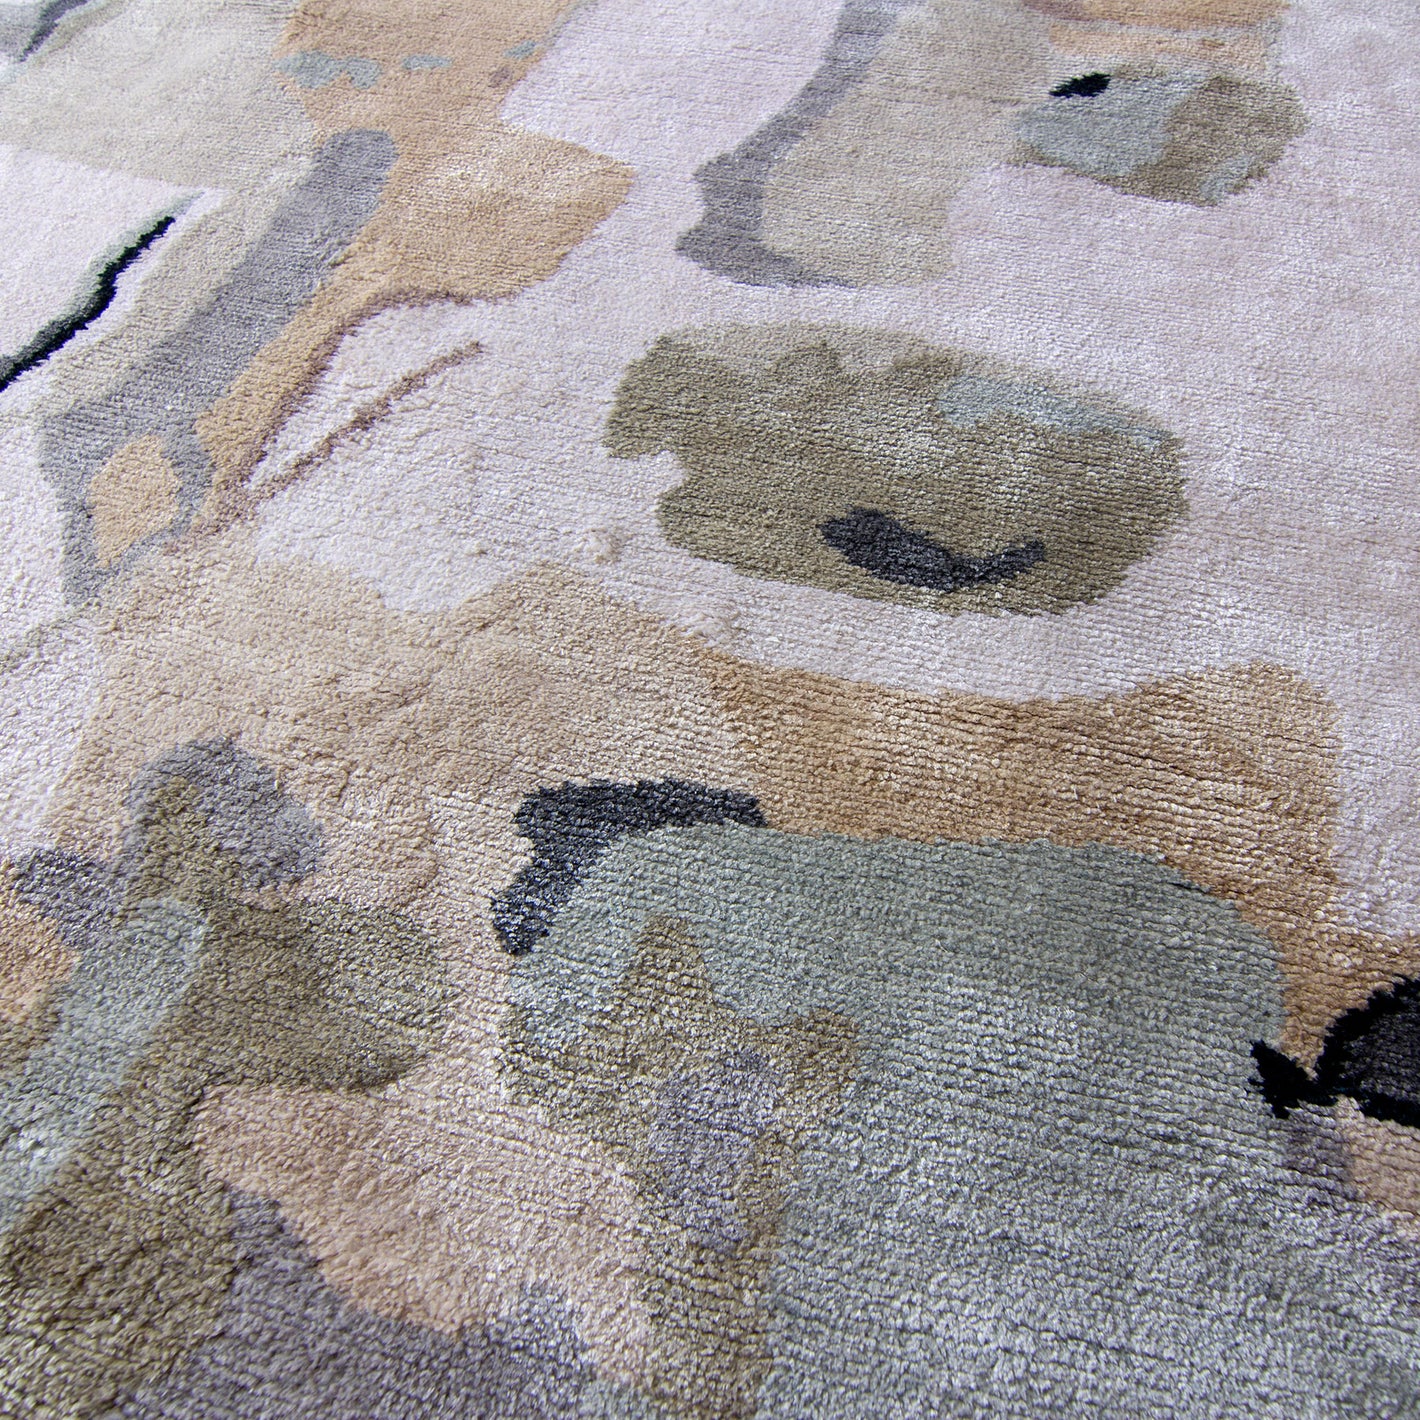 A close-up of a rug with a pattern on it